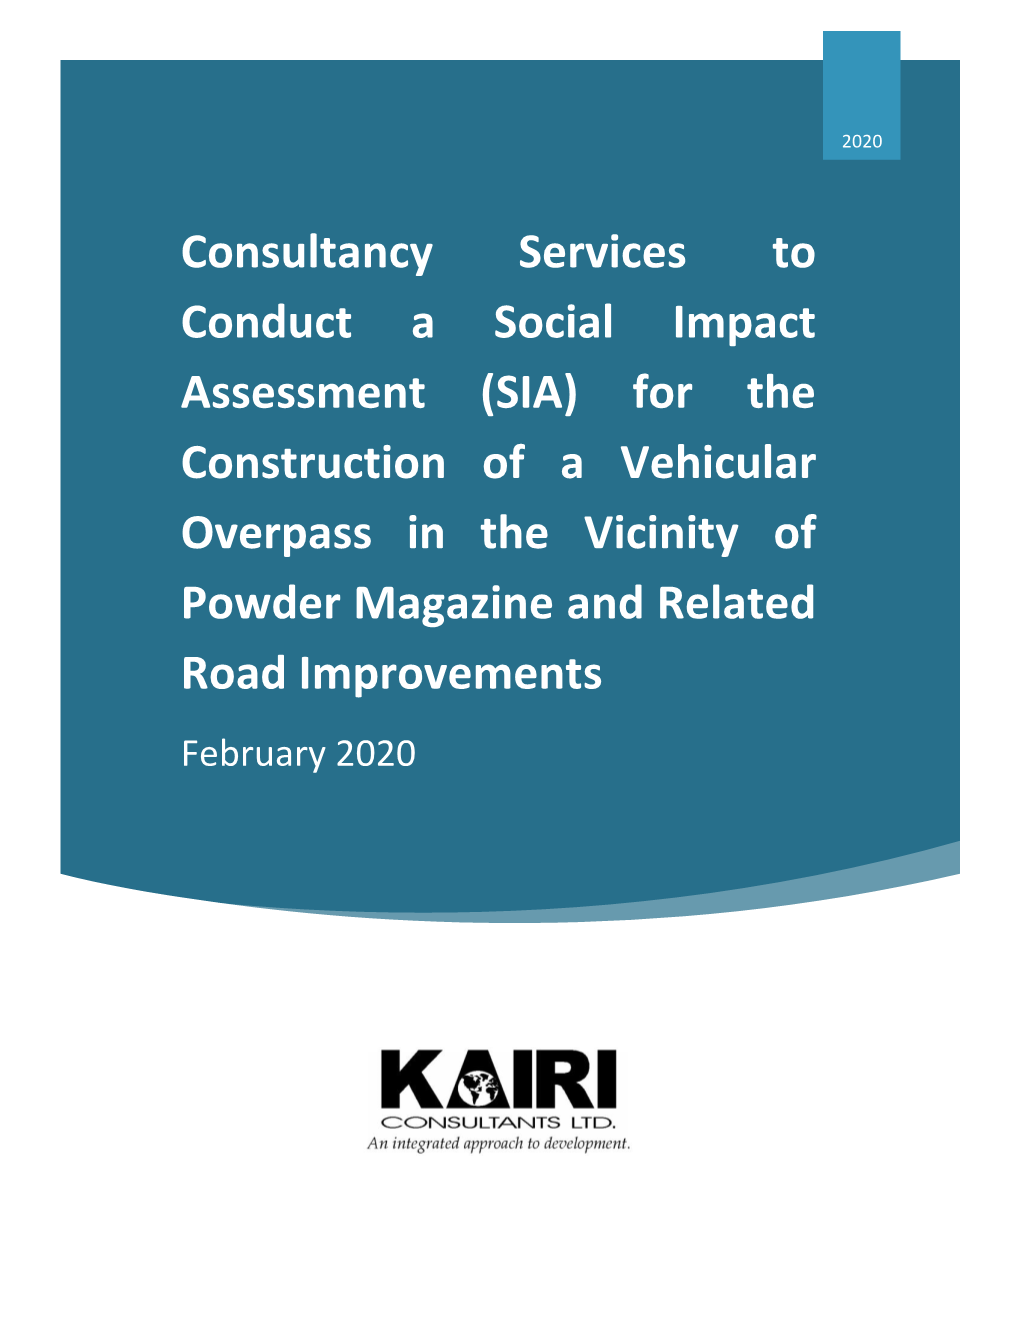 Consultancy Services to Conduct a Social Impact Assessment (SIA)